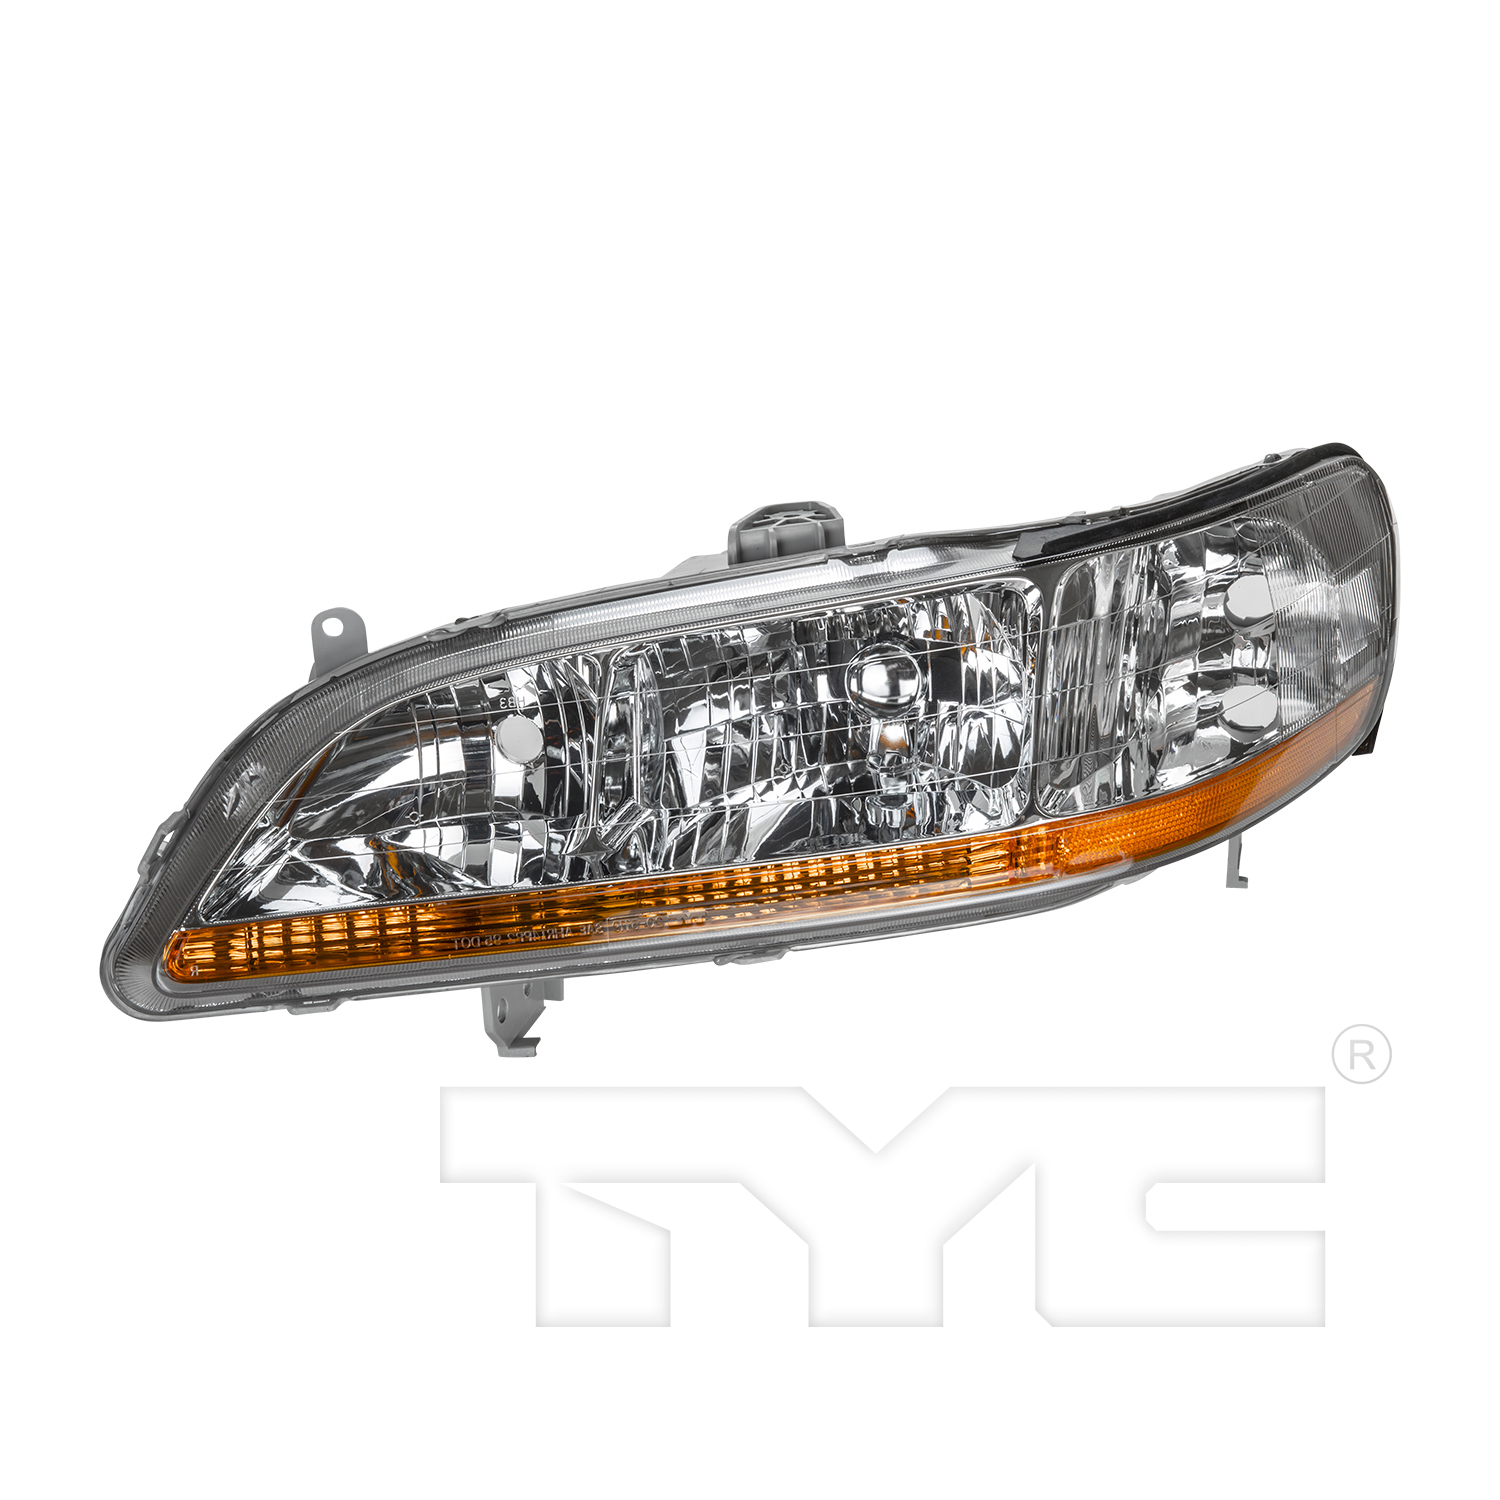 Aftermarket HEADLIGHTS for HONDA - ACCORD, ACCORD,98-00,LT Headlamp assy composite